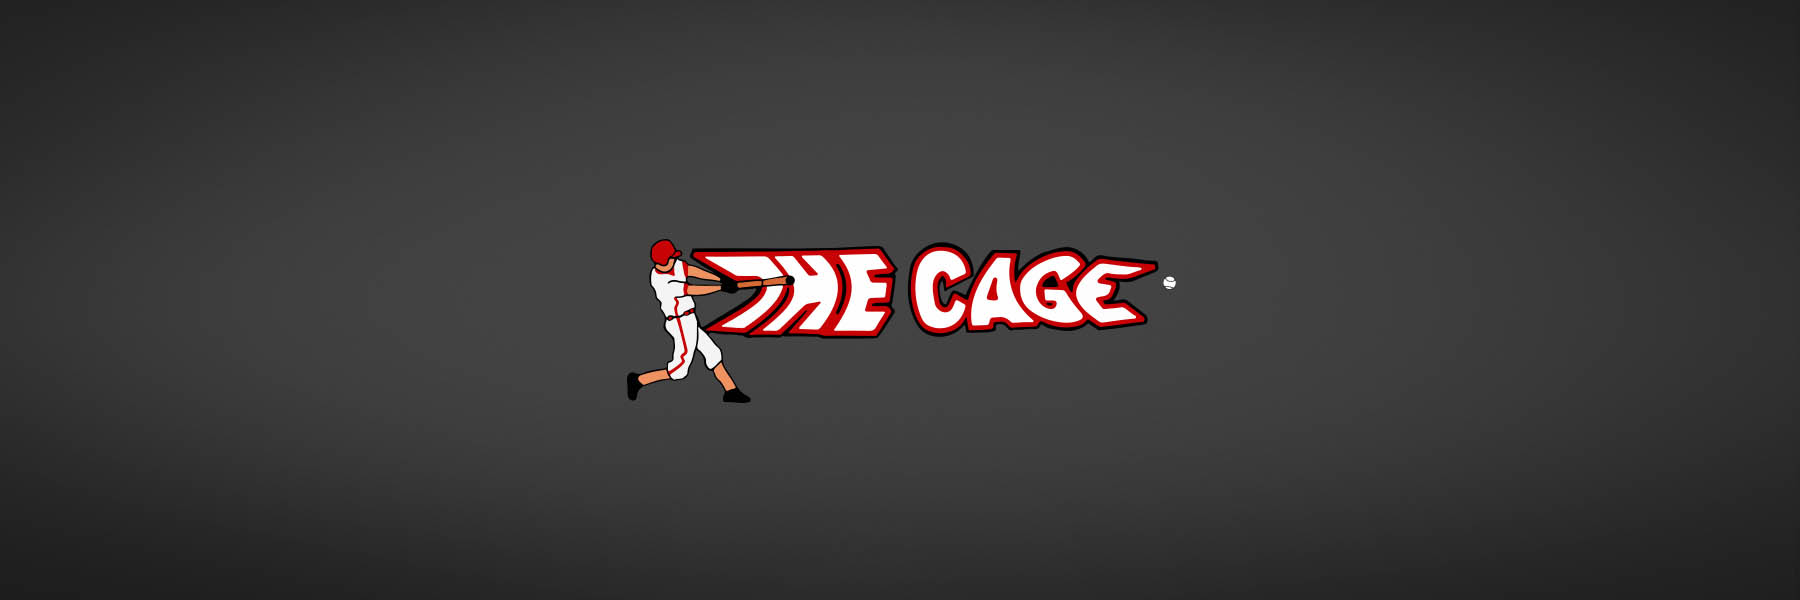 (c) Thecage.be